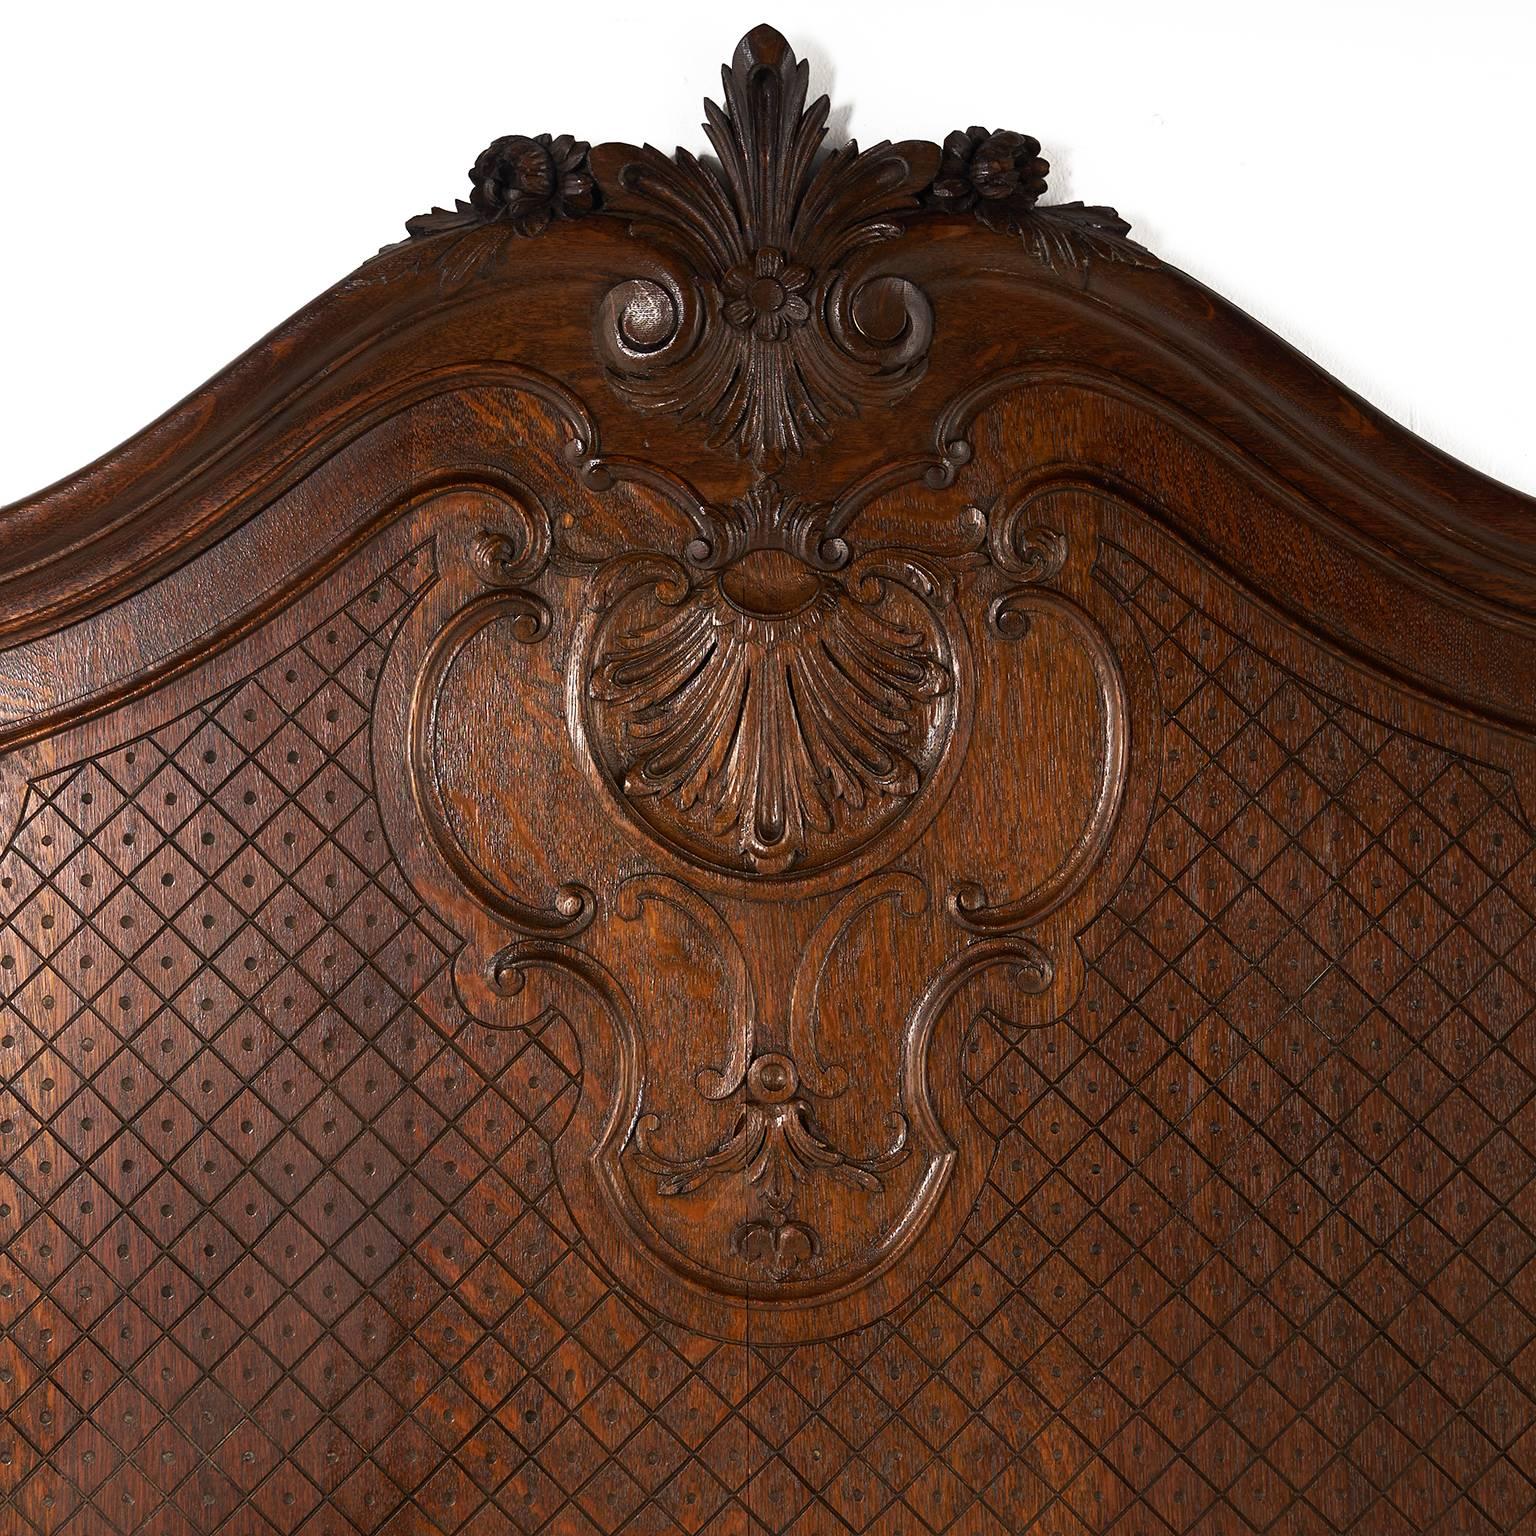 Elegant and finely-detailed hand-carved oak trumeau. This is a lovely piece equally at home above a fireplace or propped up on the floor as a purely decorative piece.




